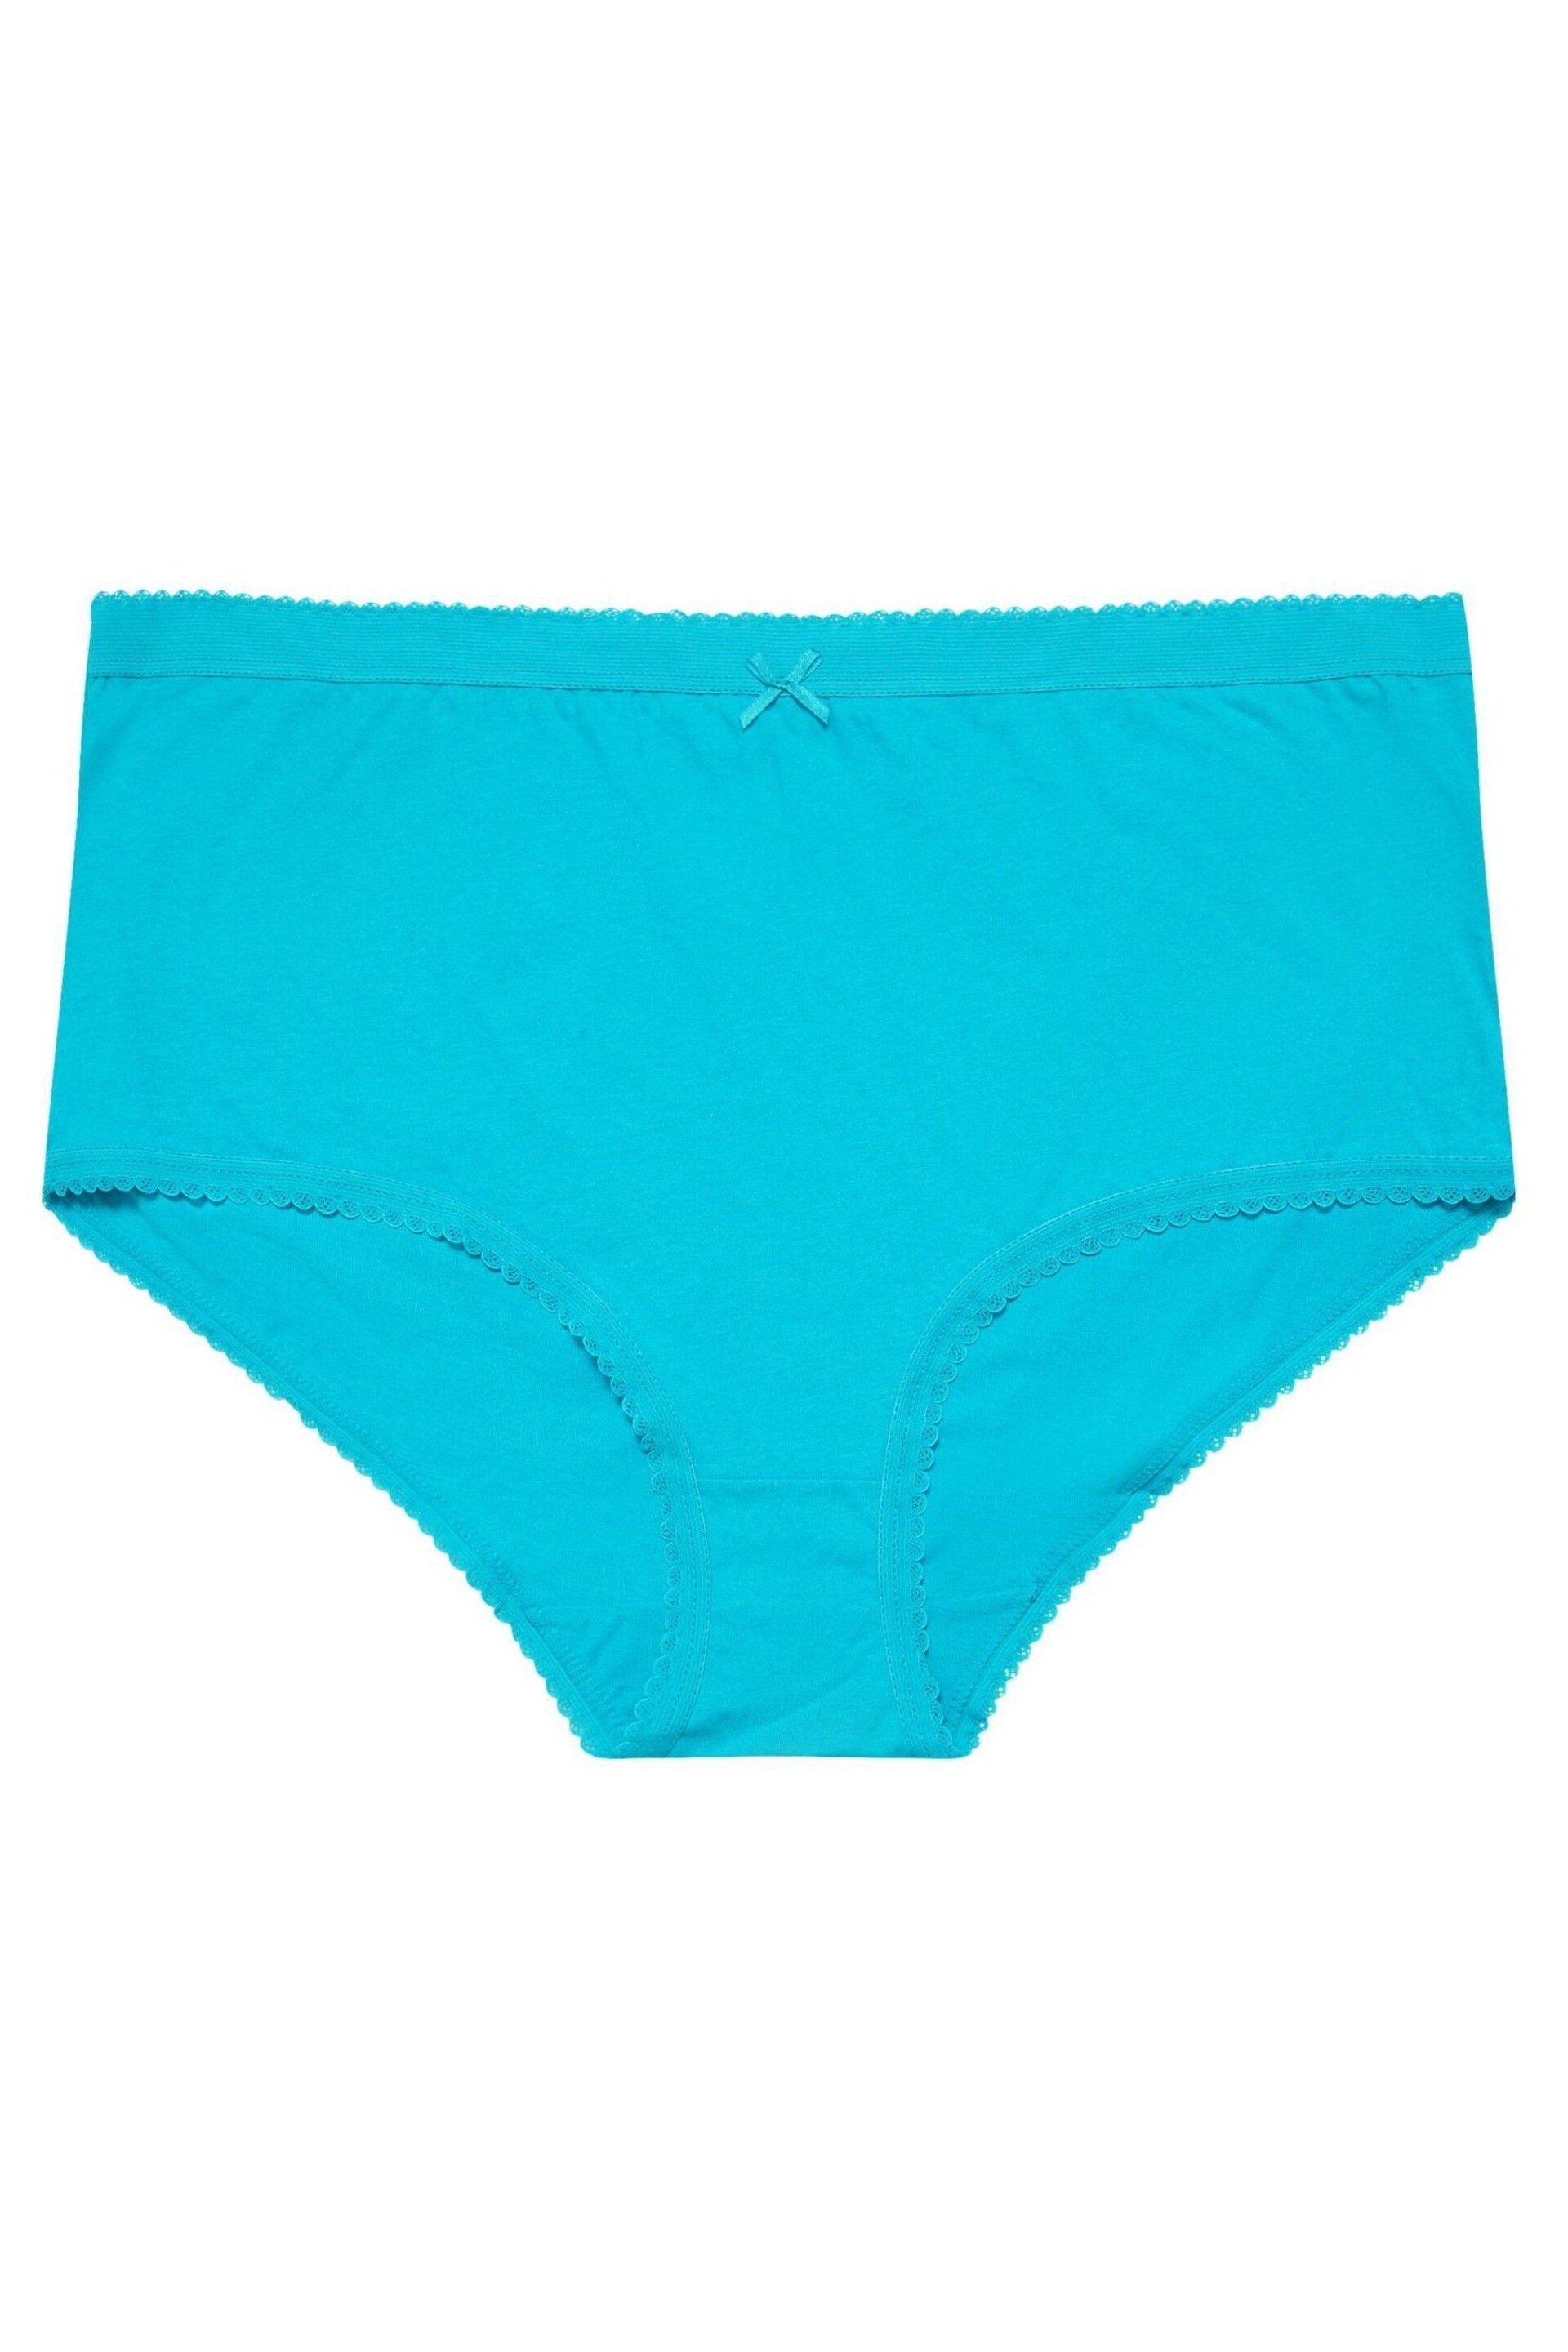 Yours Curve Blue Full Briefs Knickers 5 Pack - Image 5 of 5